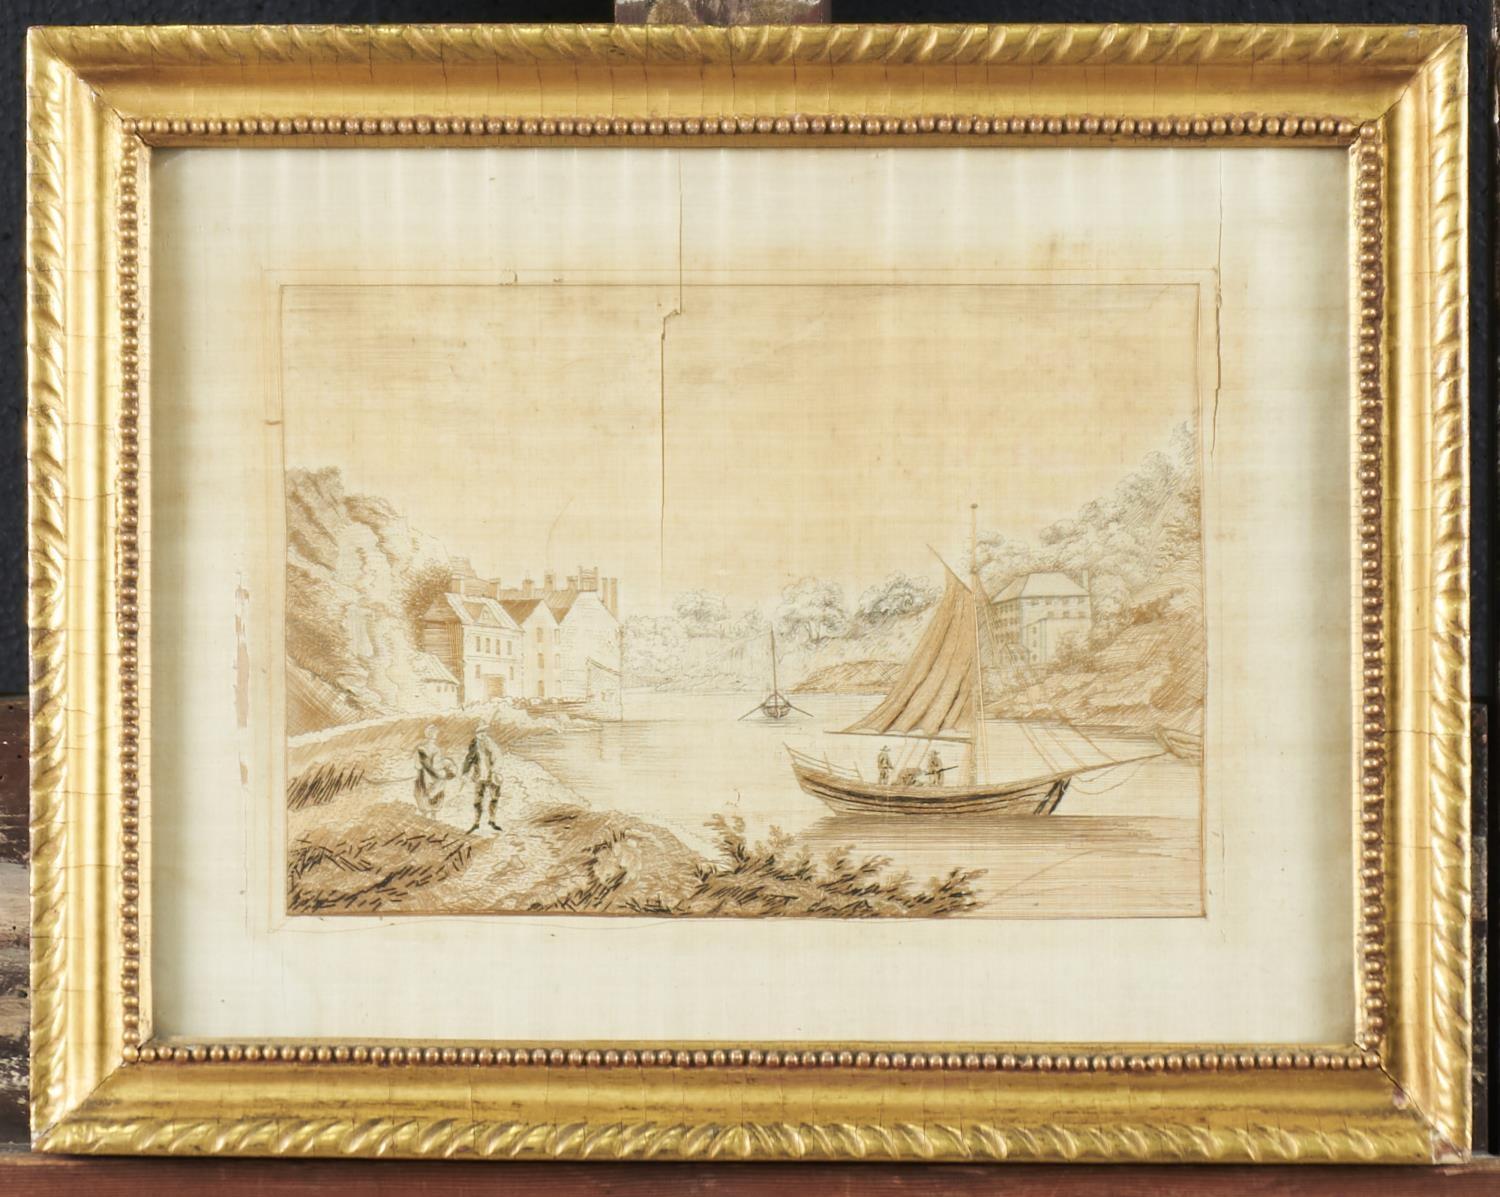 A PAIR OF NORTHERN EUROPEAN SILK NEEDLEWORK PICTURES, LATE 18TH C, OF RIVER SCENES WITH PEASANTS, IN - Image 4 of 4